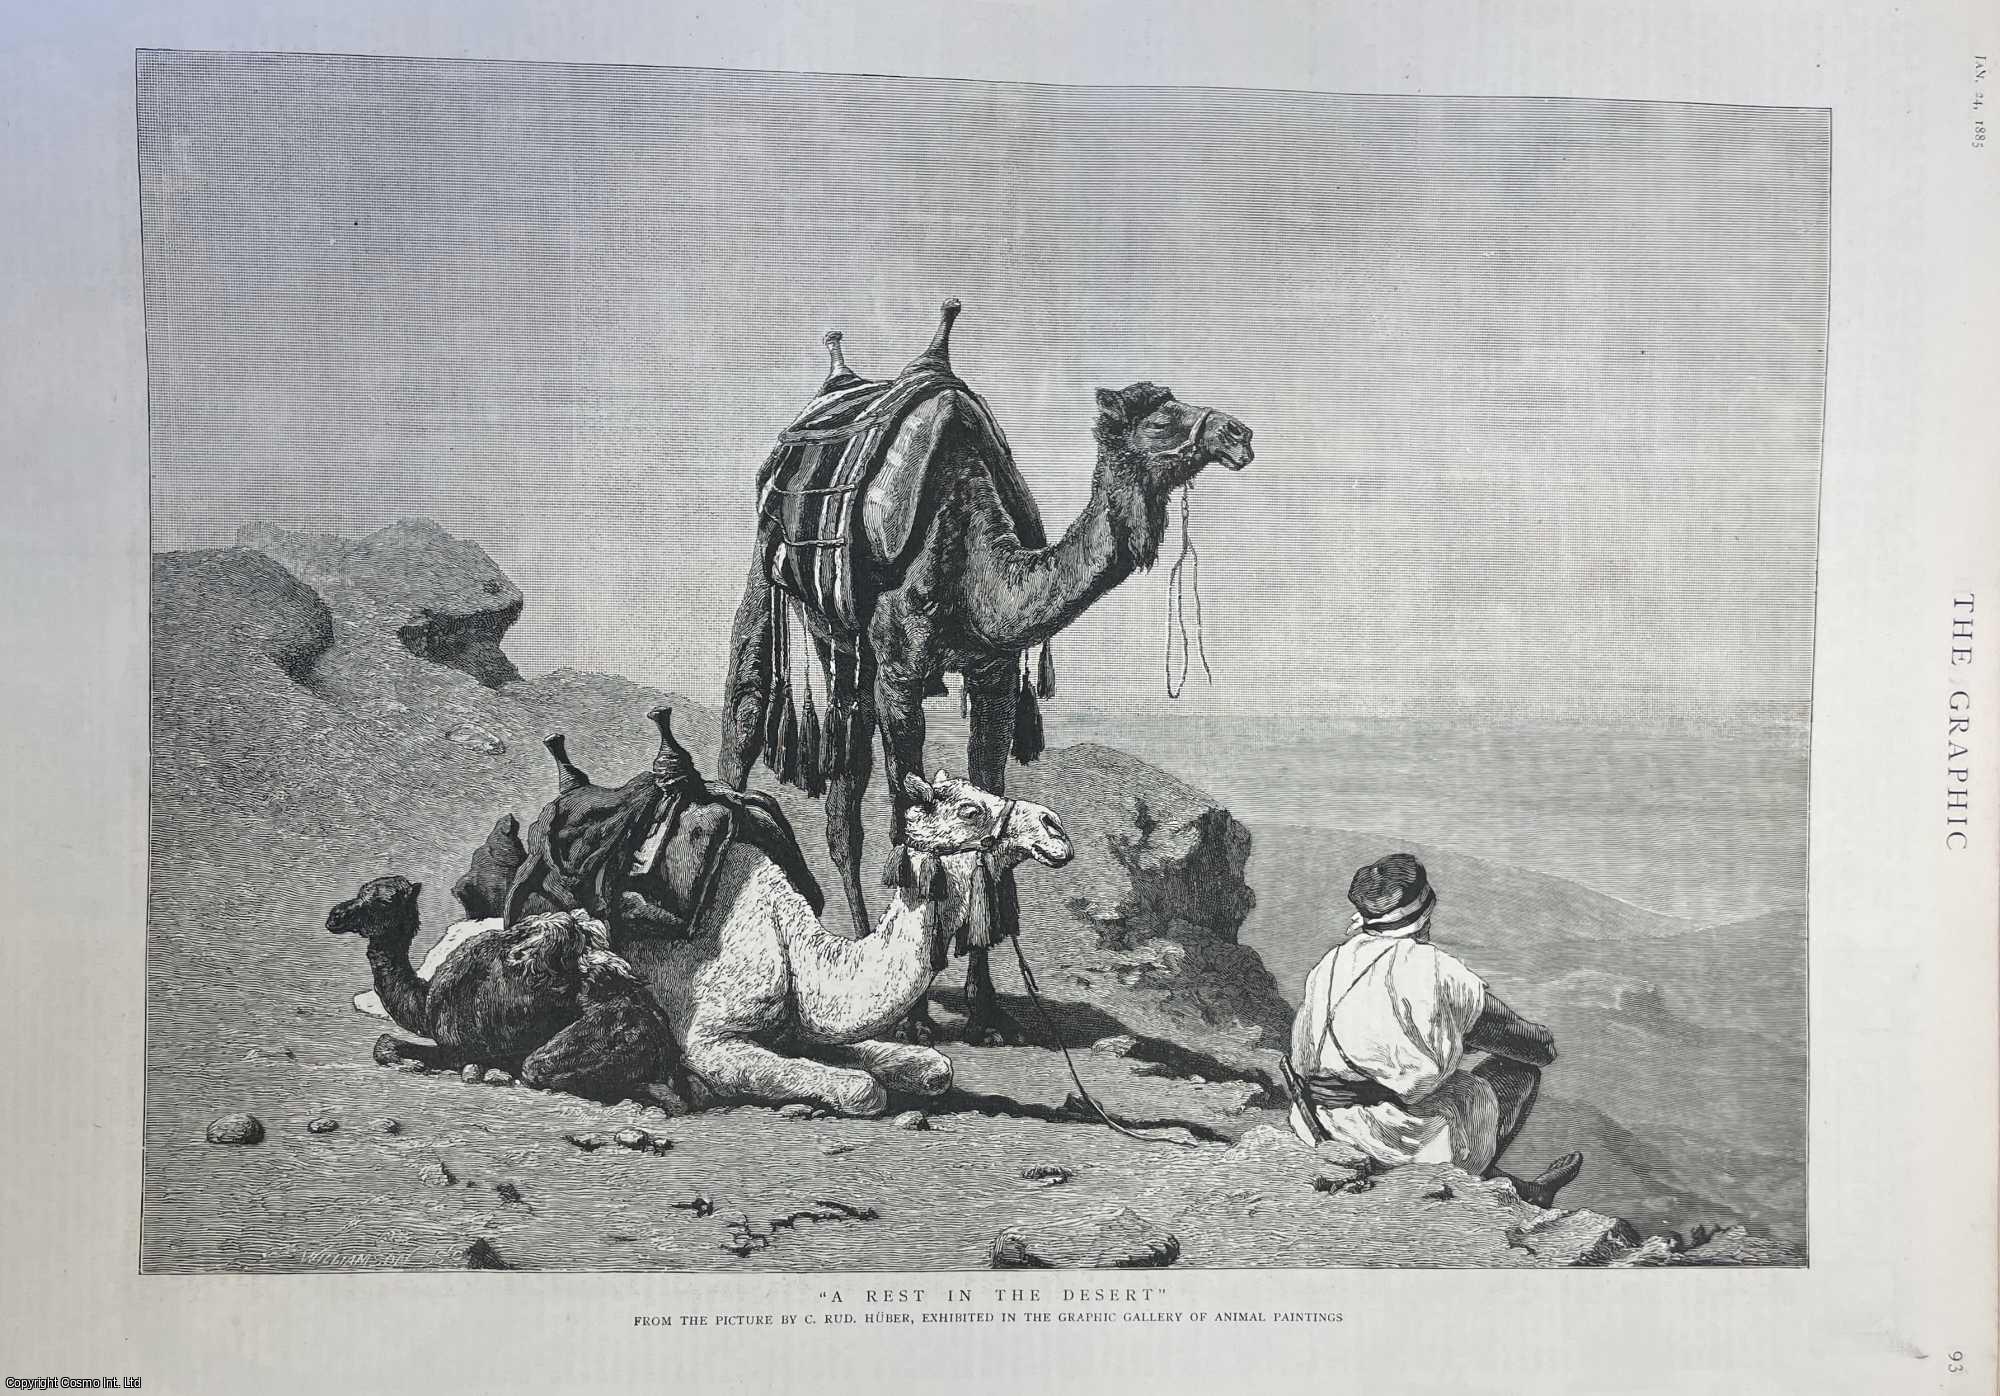 C. Rud Huber - A Rest in the Desert. An original page from the Graphic Illustrated Weekly Magazine, 1885.